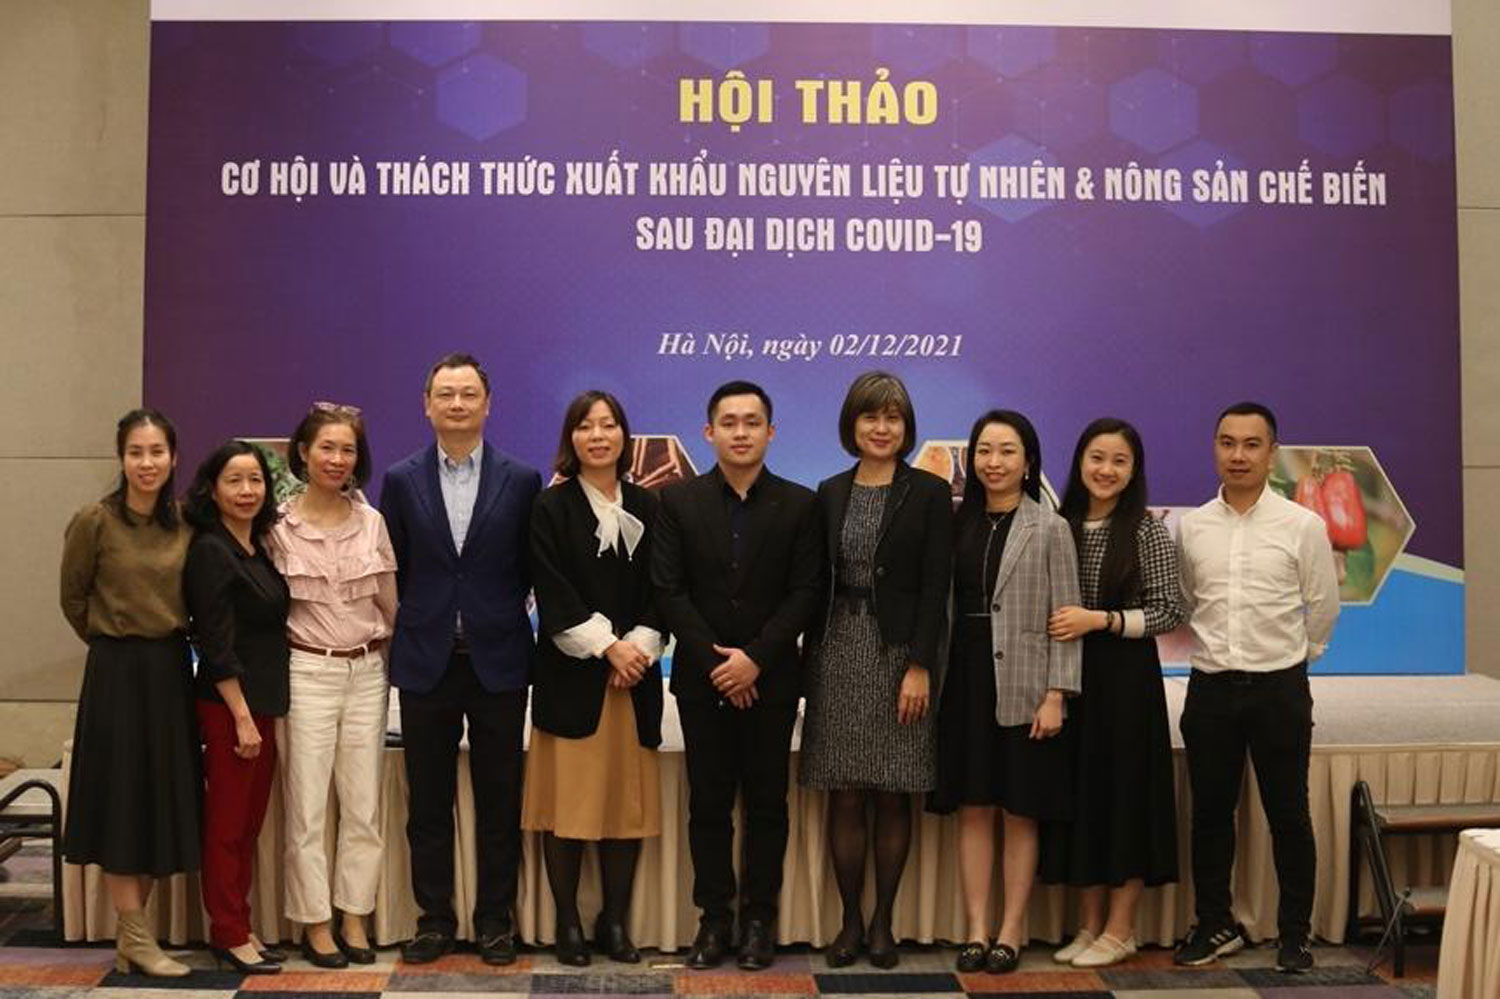 Hybrid workshop “Post Covid 19 challenges and opportunities for Vietnam SMEs in natural ingredients and processed agricultural sectors”